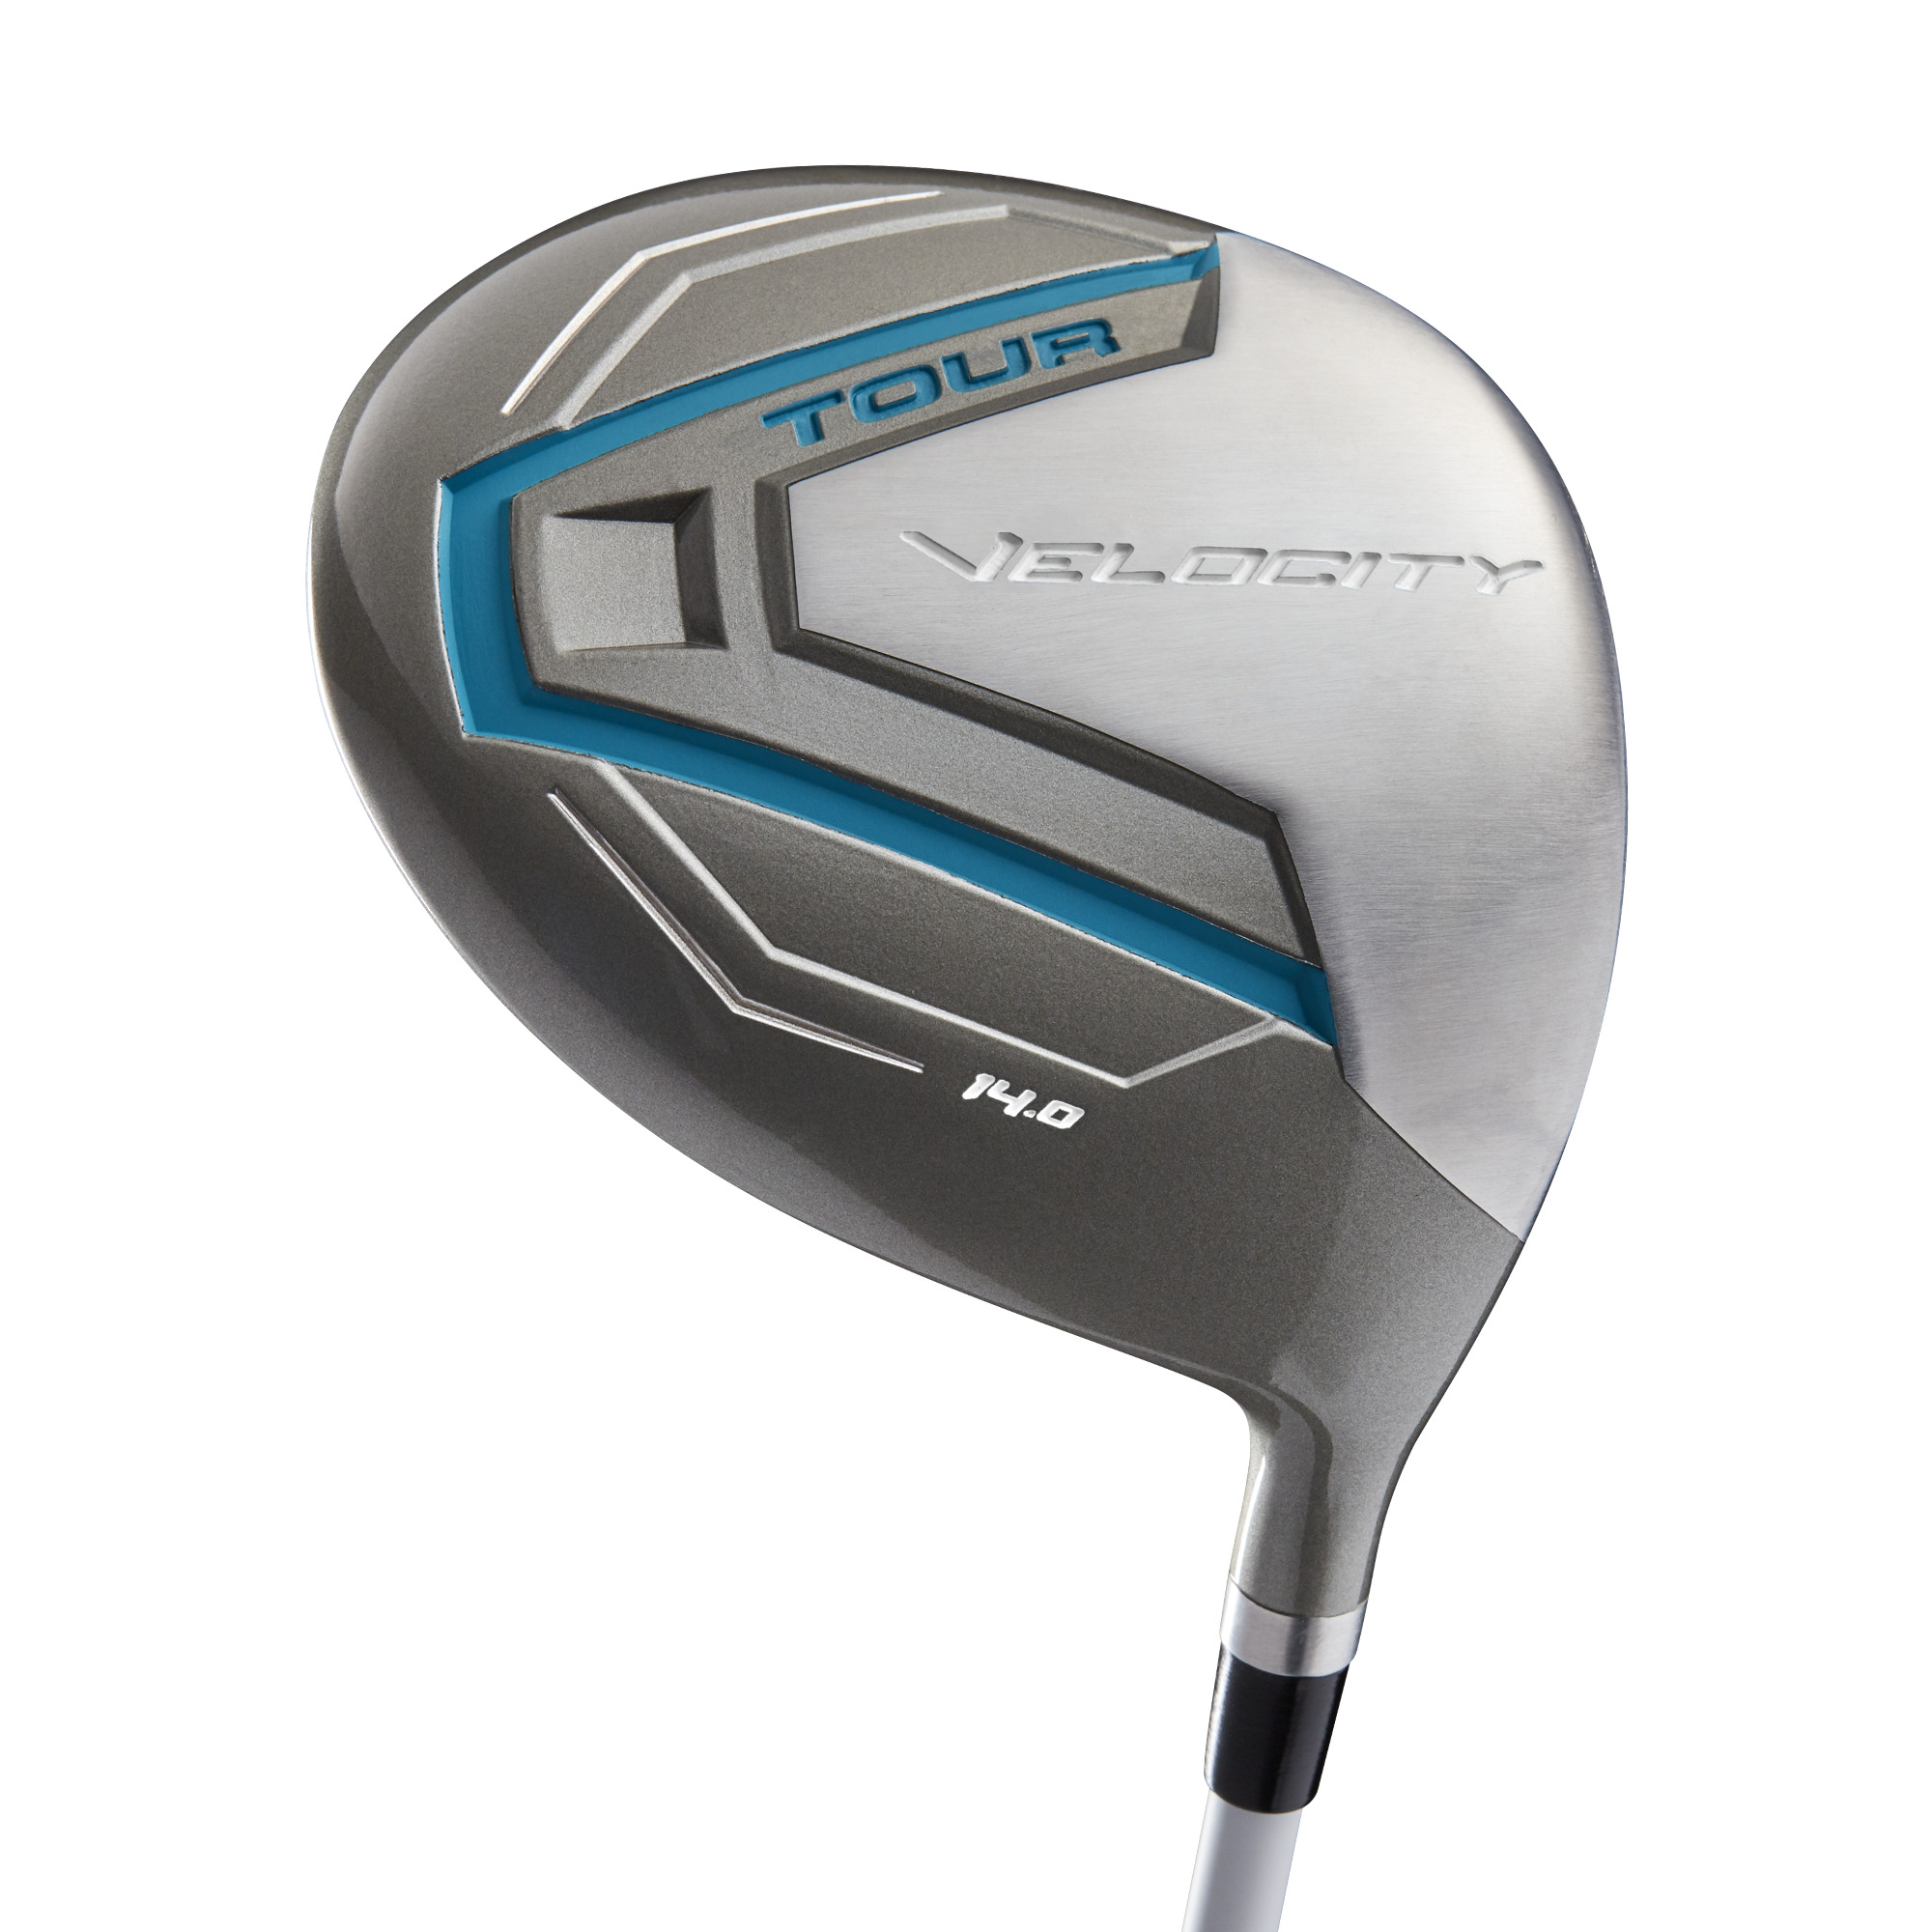 Wilson Tour Velocity Women's Golf Club Set, Right Handed - image 3 of 7